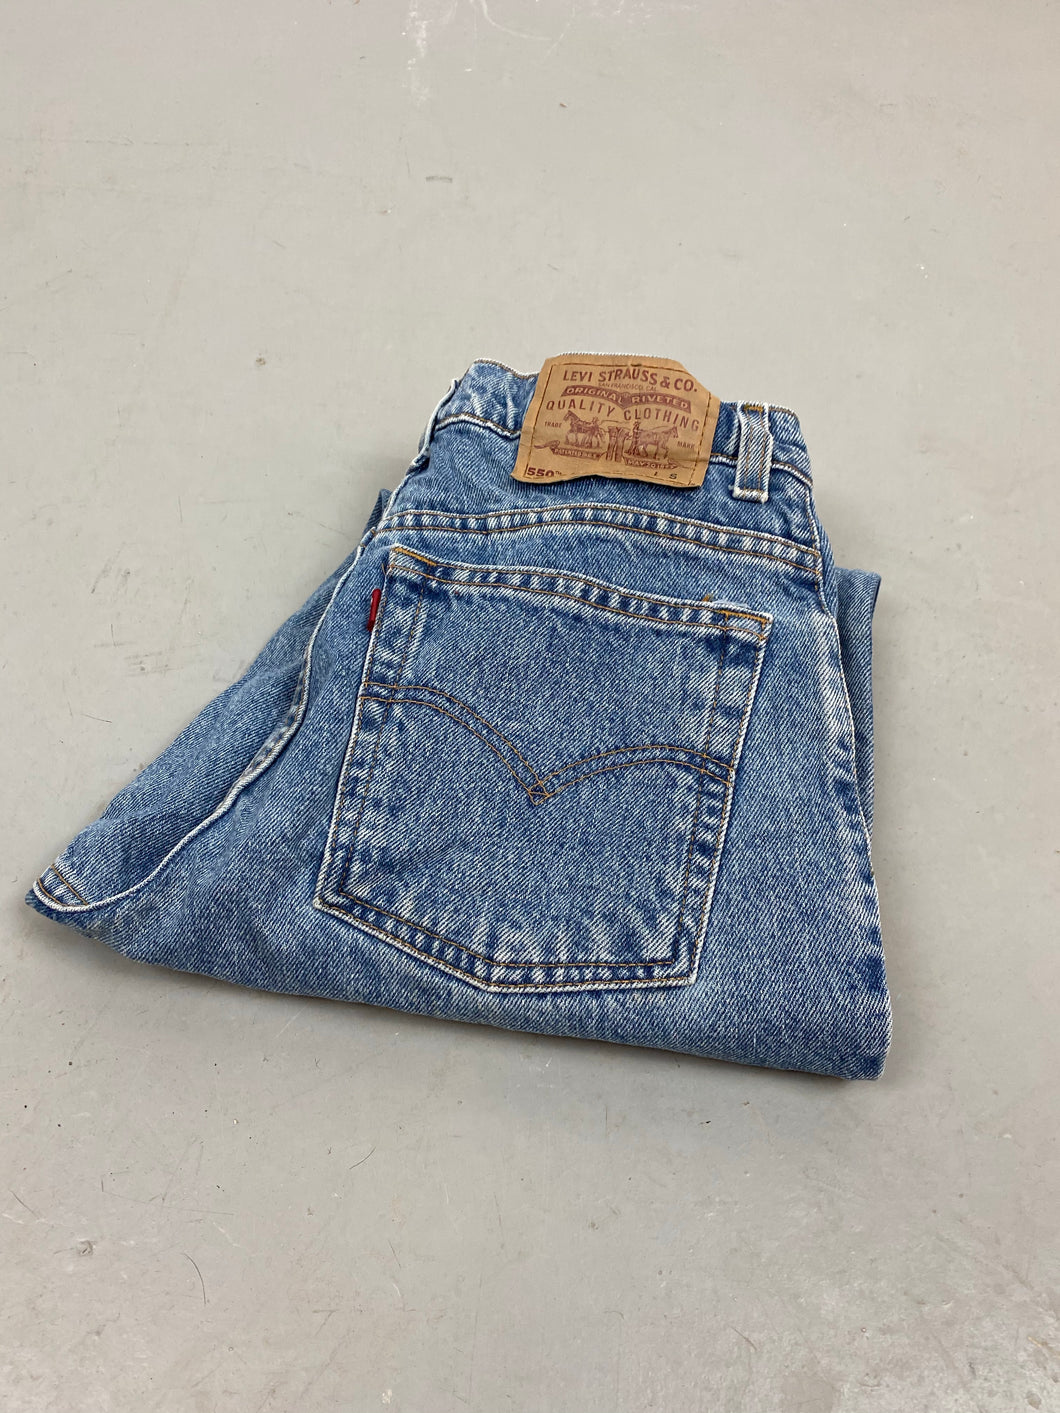 90s Fitted high waisted Levi’s denim